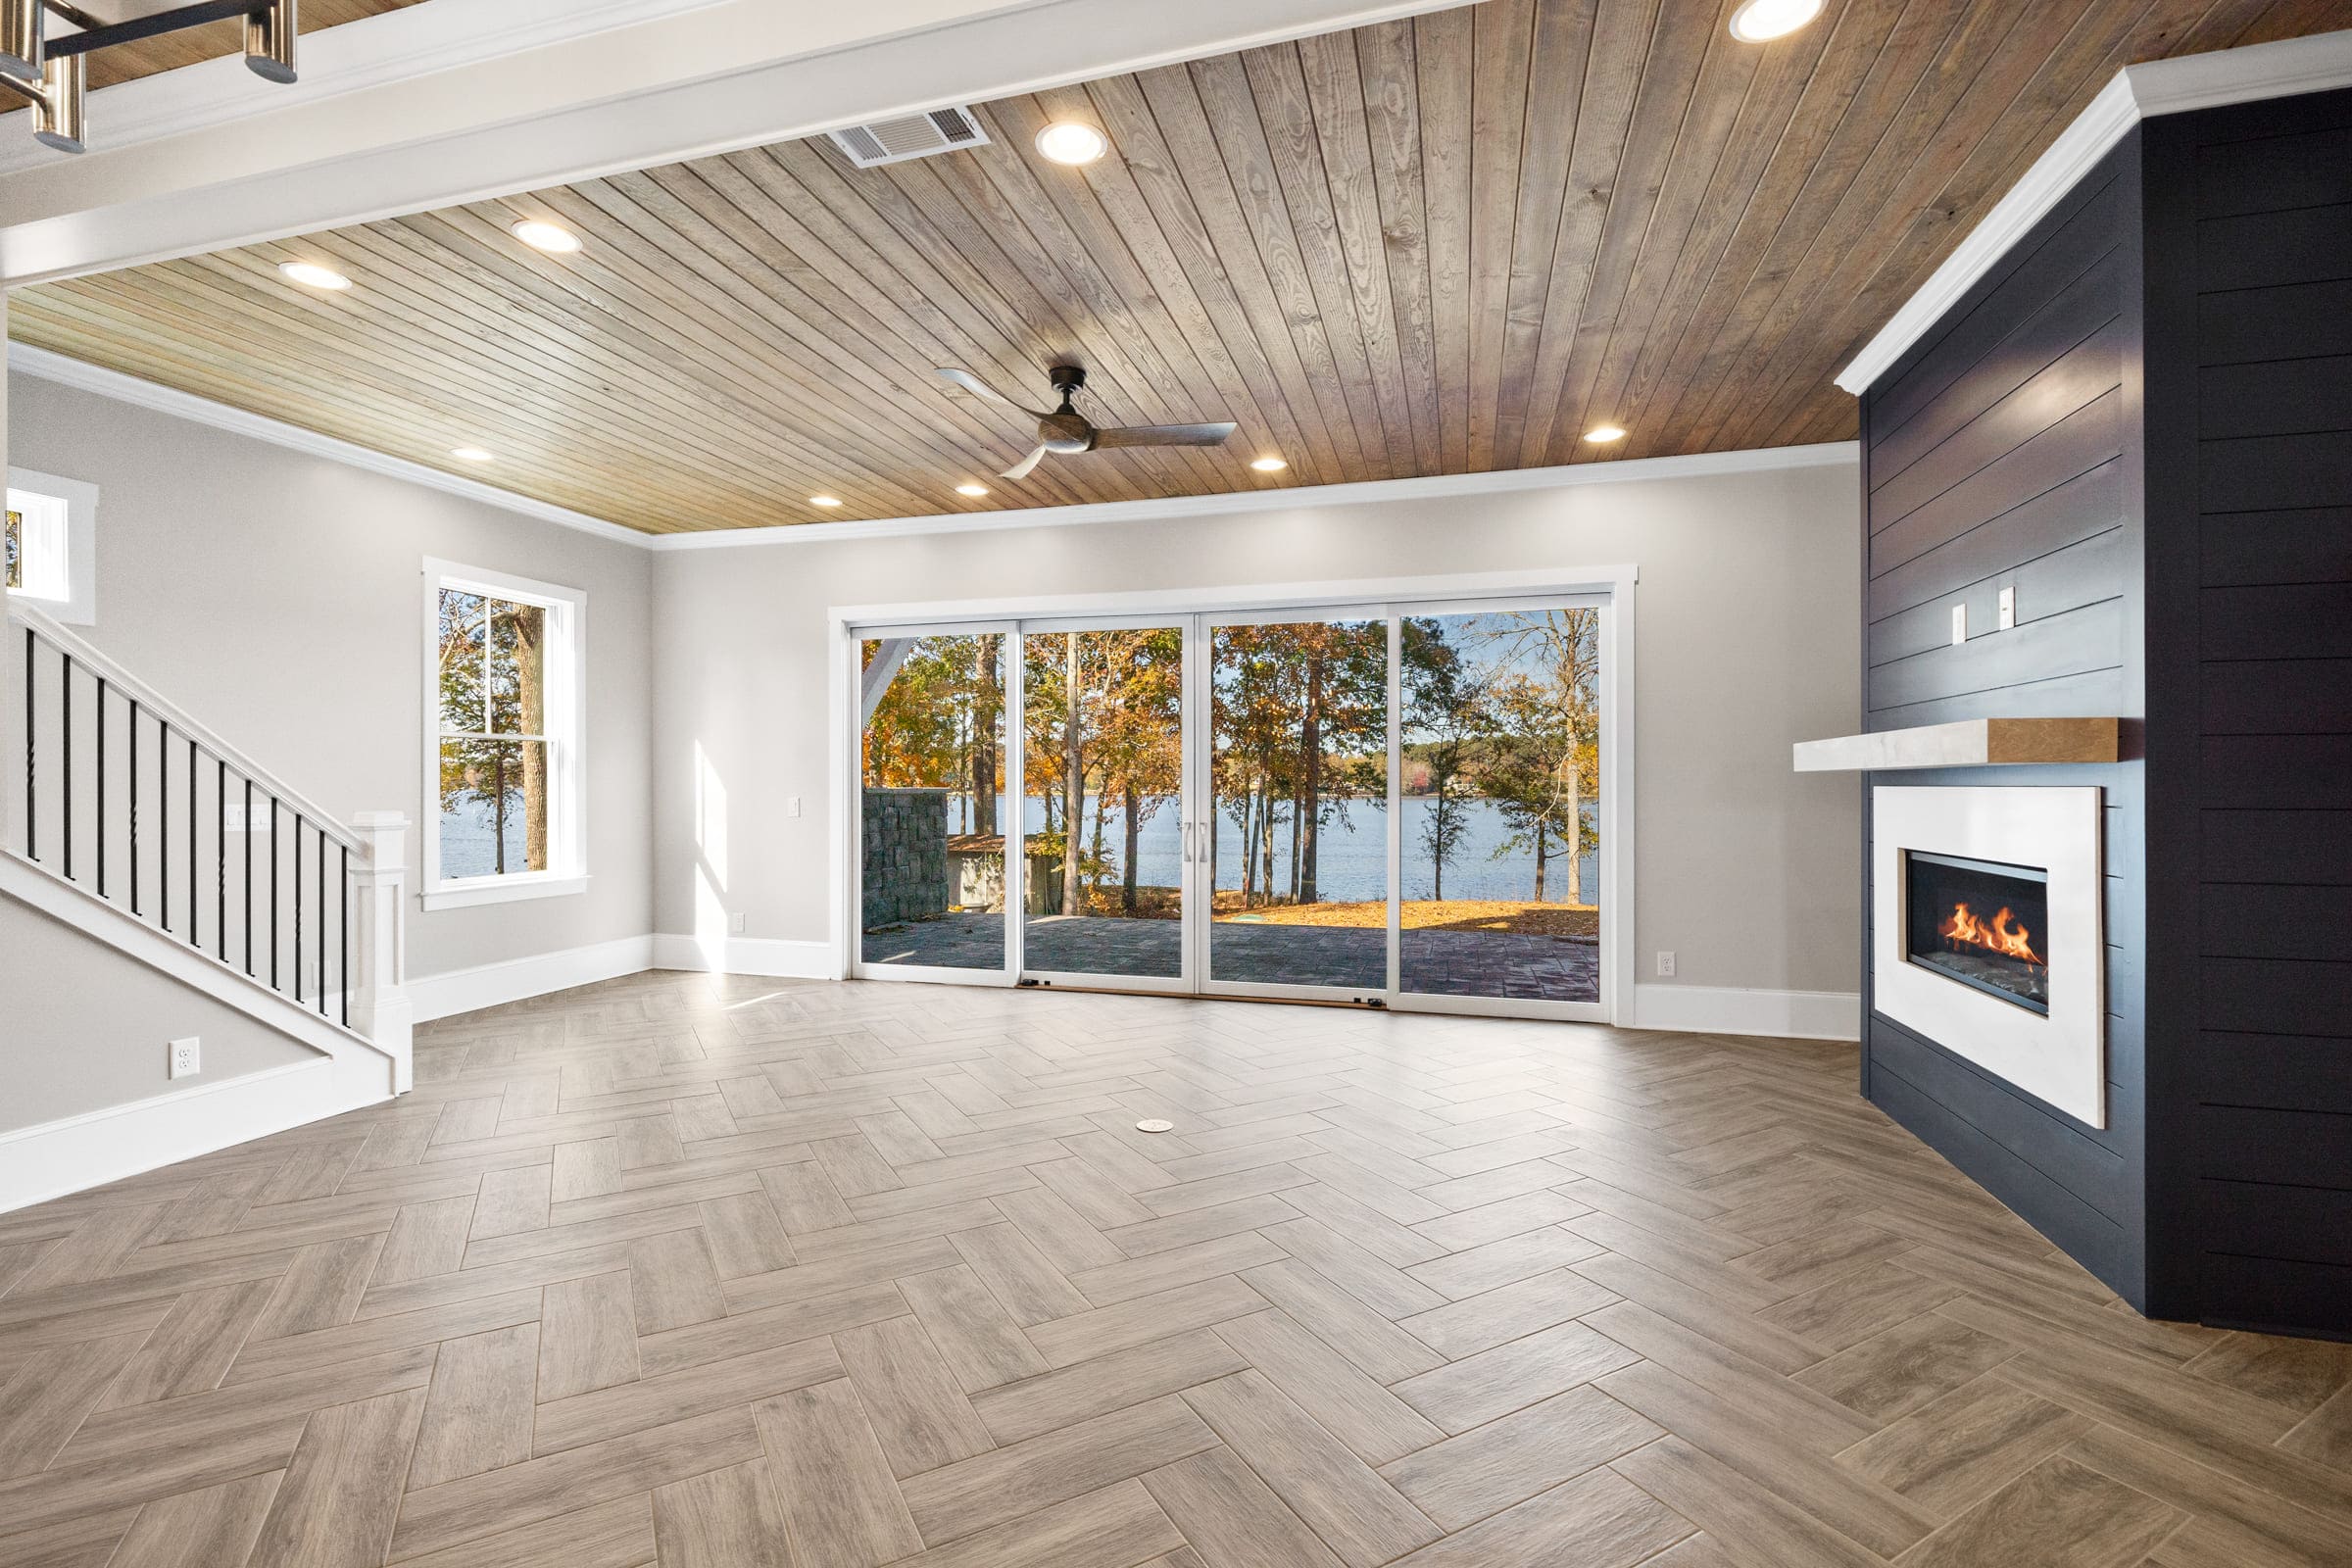 Detailed Wood Floor with Full Glass Patio Door Leading to Backyard and Lakefront 